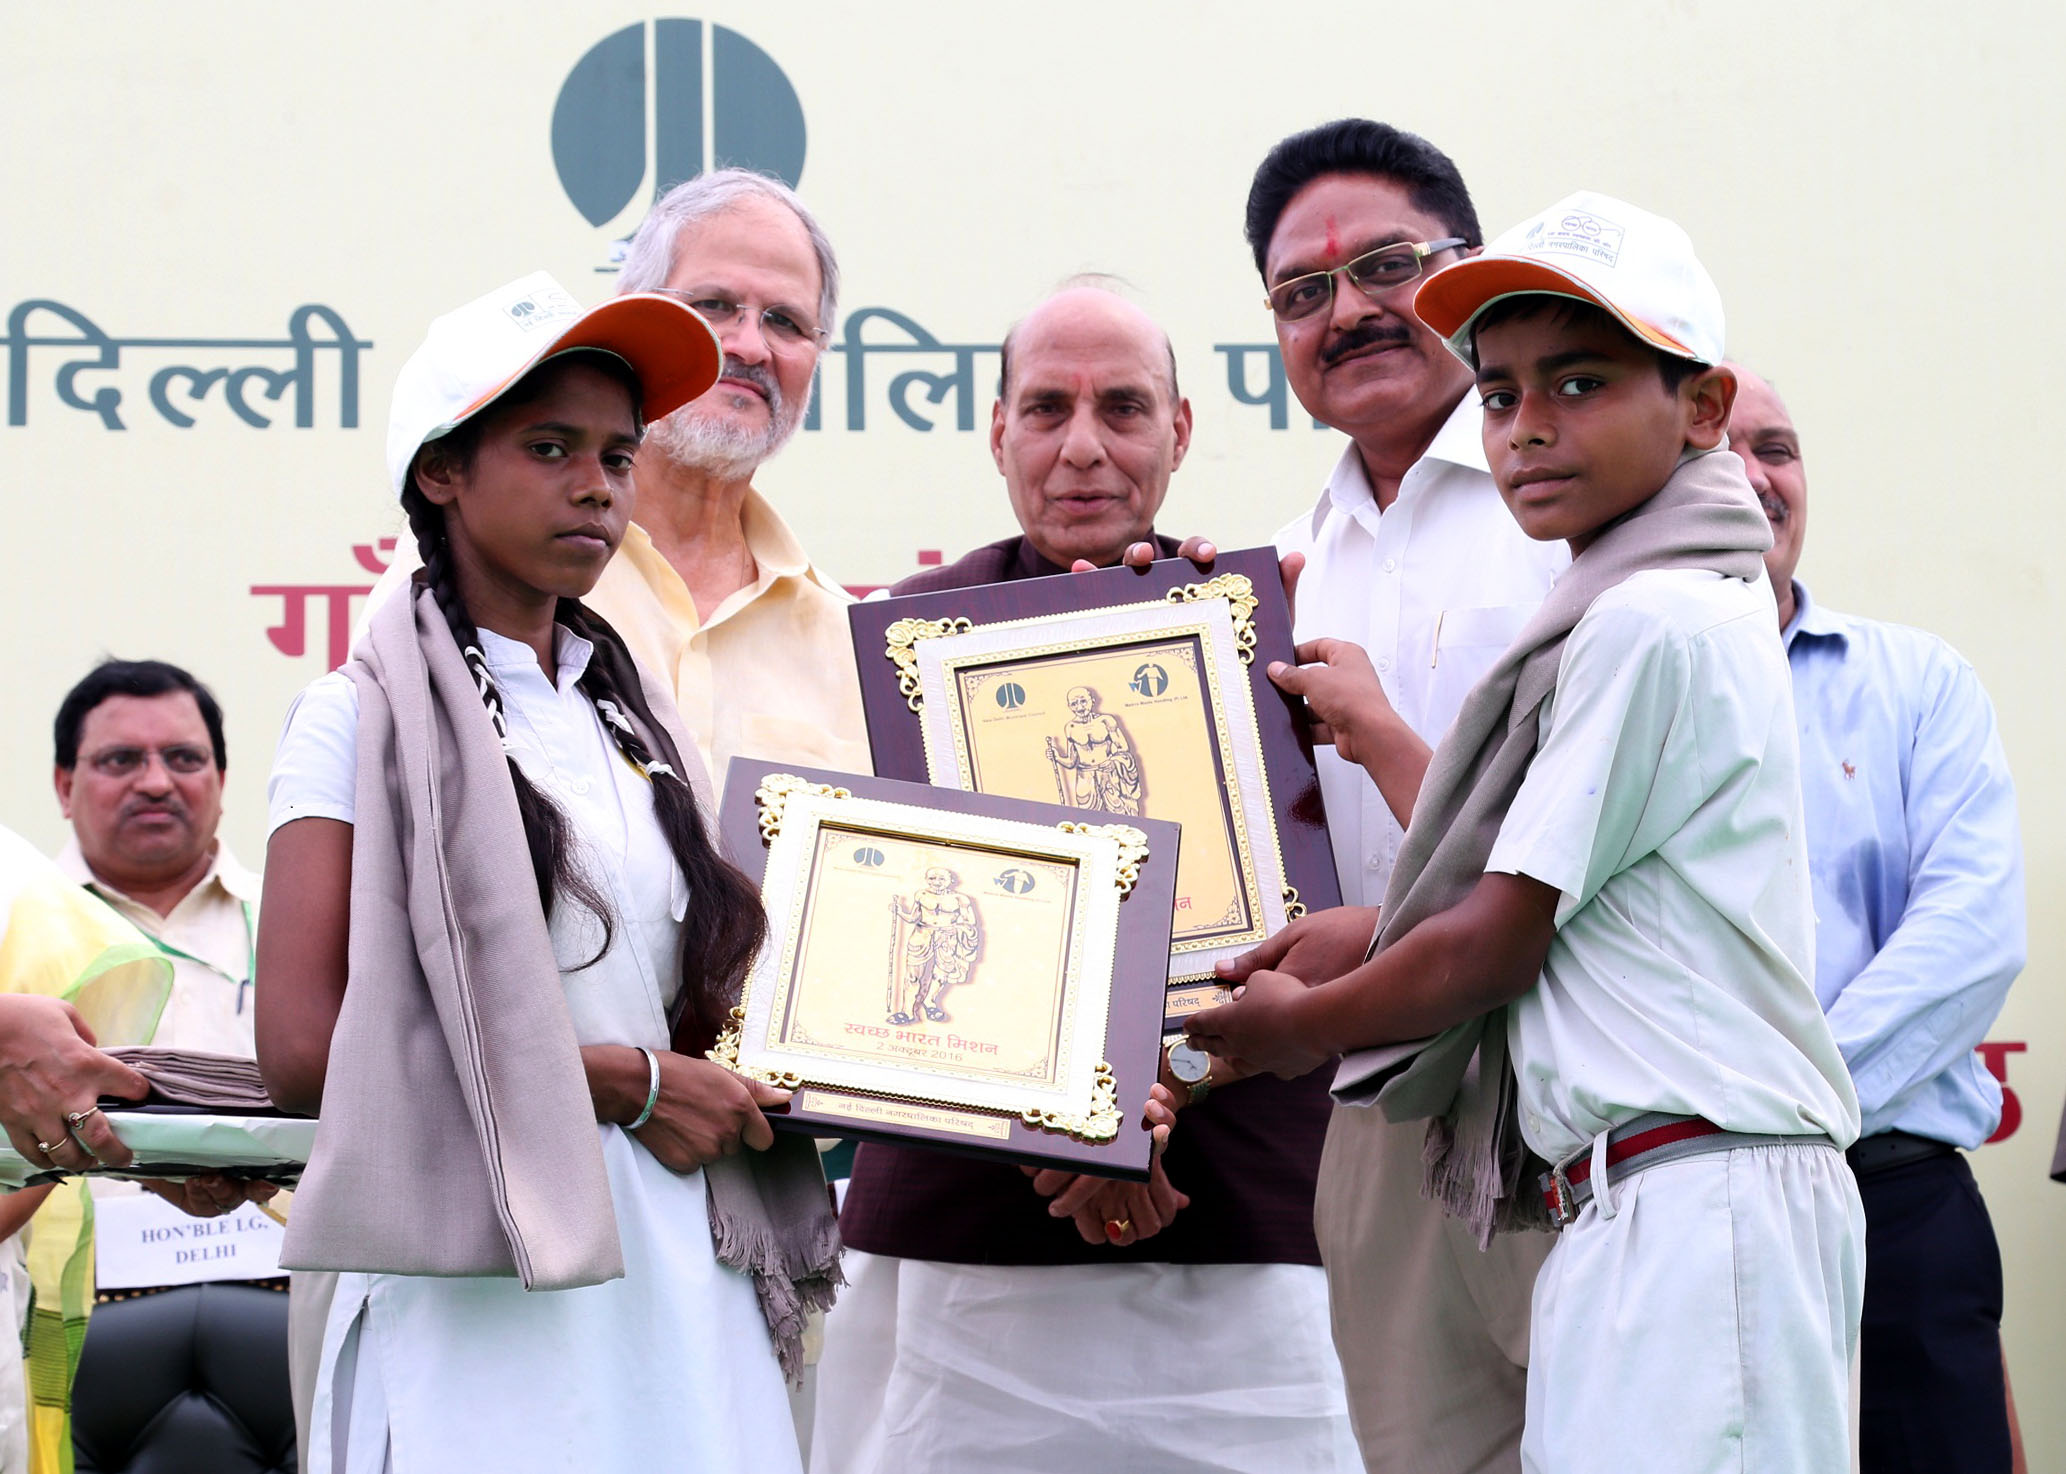 The Union Home Minister, Shri Rajnath Singh felicitating children who made contribution towards the 'Cleanliness Drive' at the 'Swachhta Rally", in New Delhi on October 02, 2016. 	The Lt. Governor of Delhi, Shri Najeeb Jung is also seen.